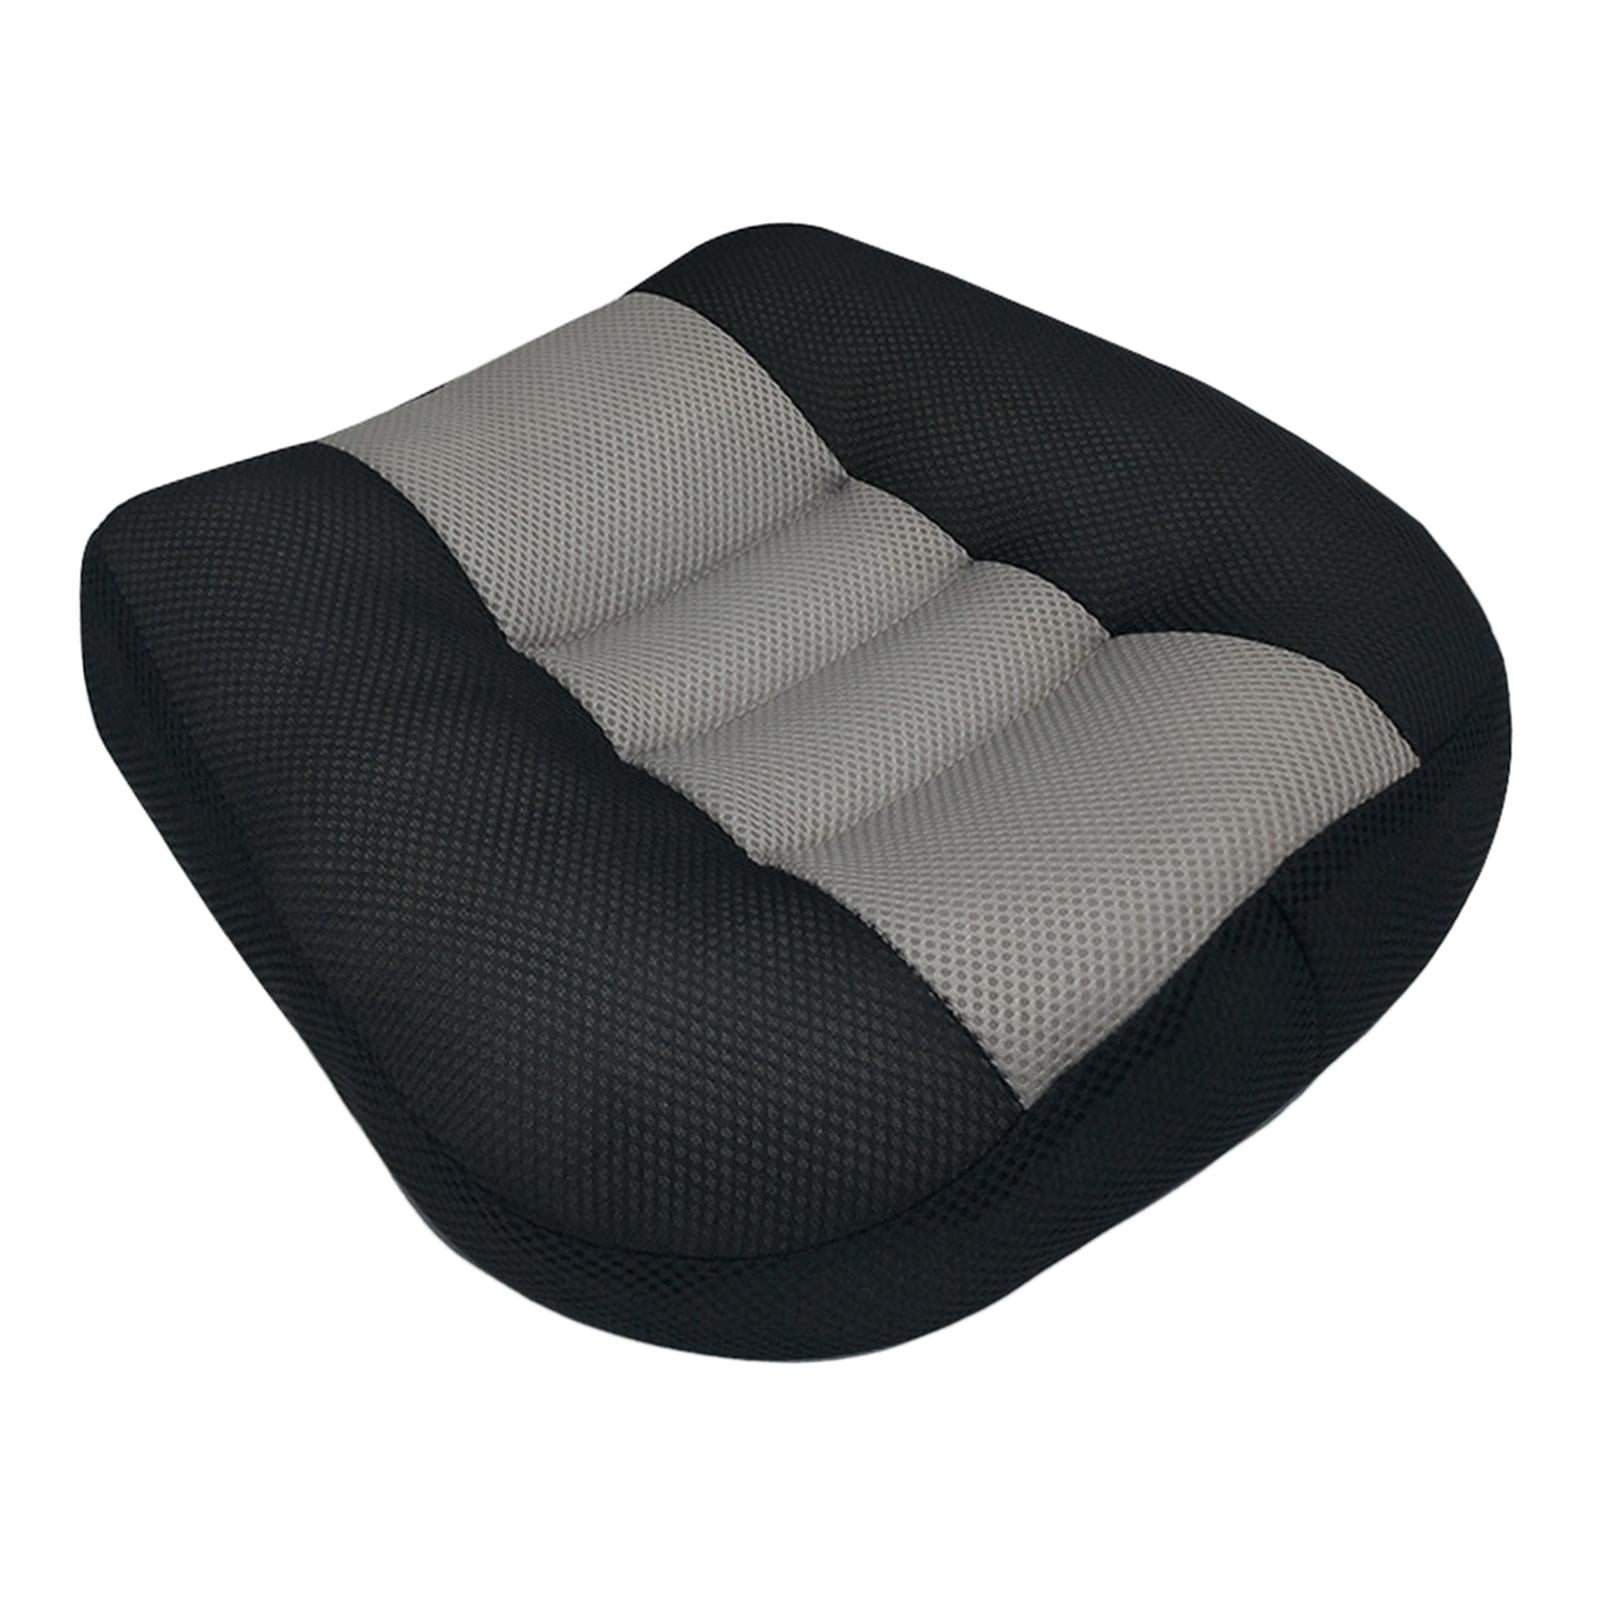 Adult Car Driver Seat Cushion Boost Mat Breathable Mesh Portable Angle